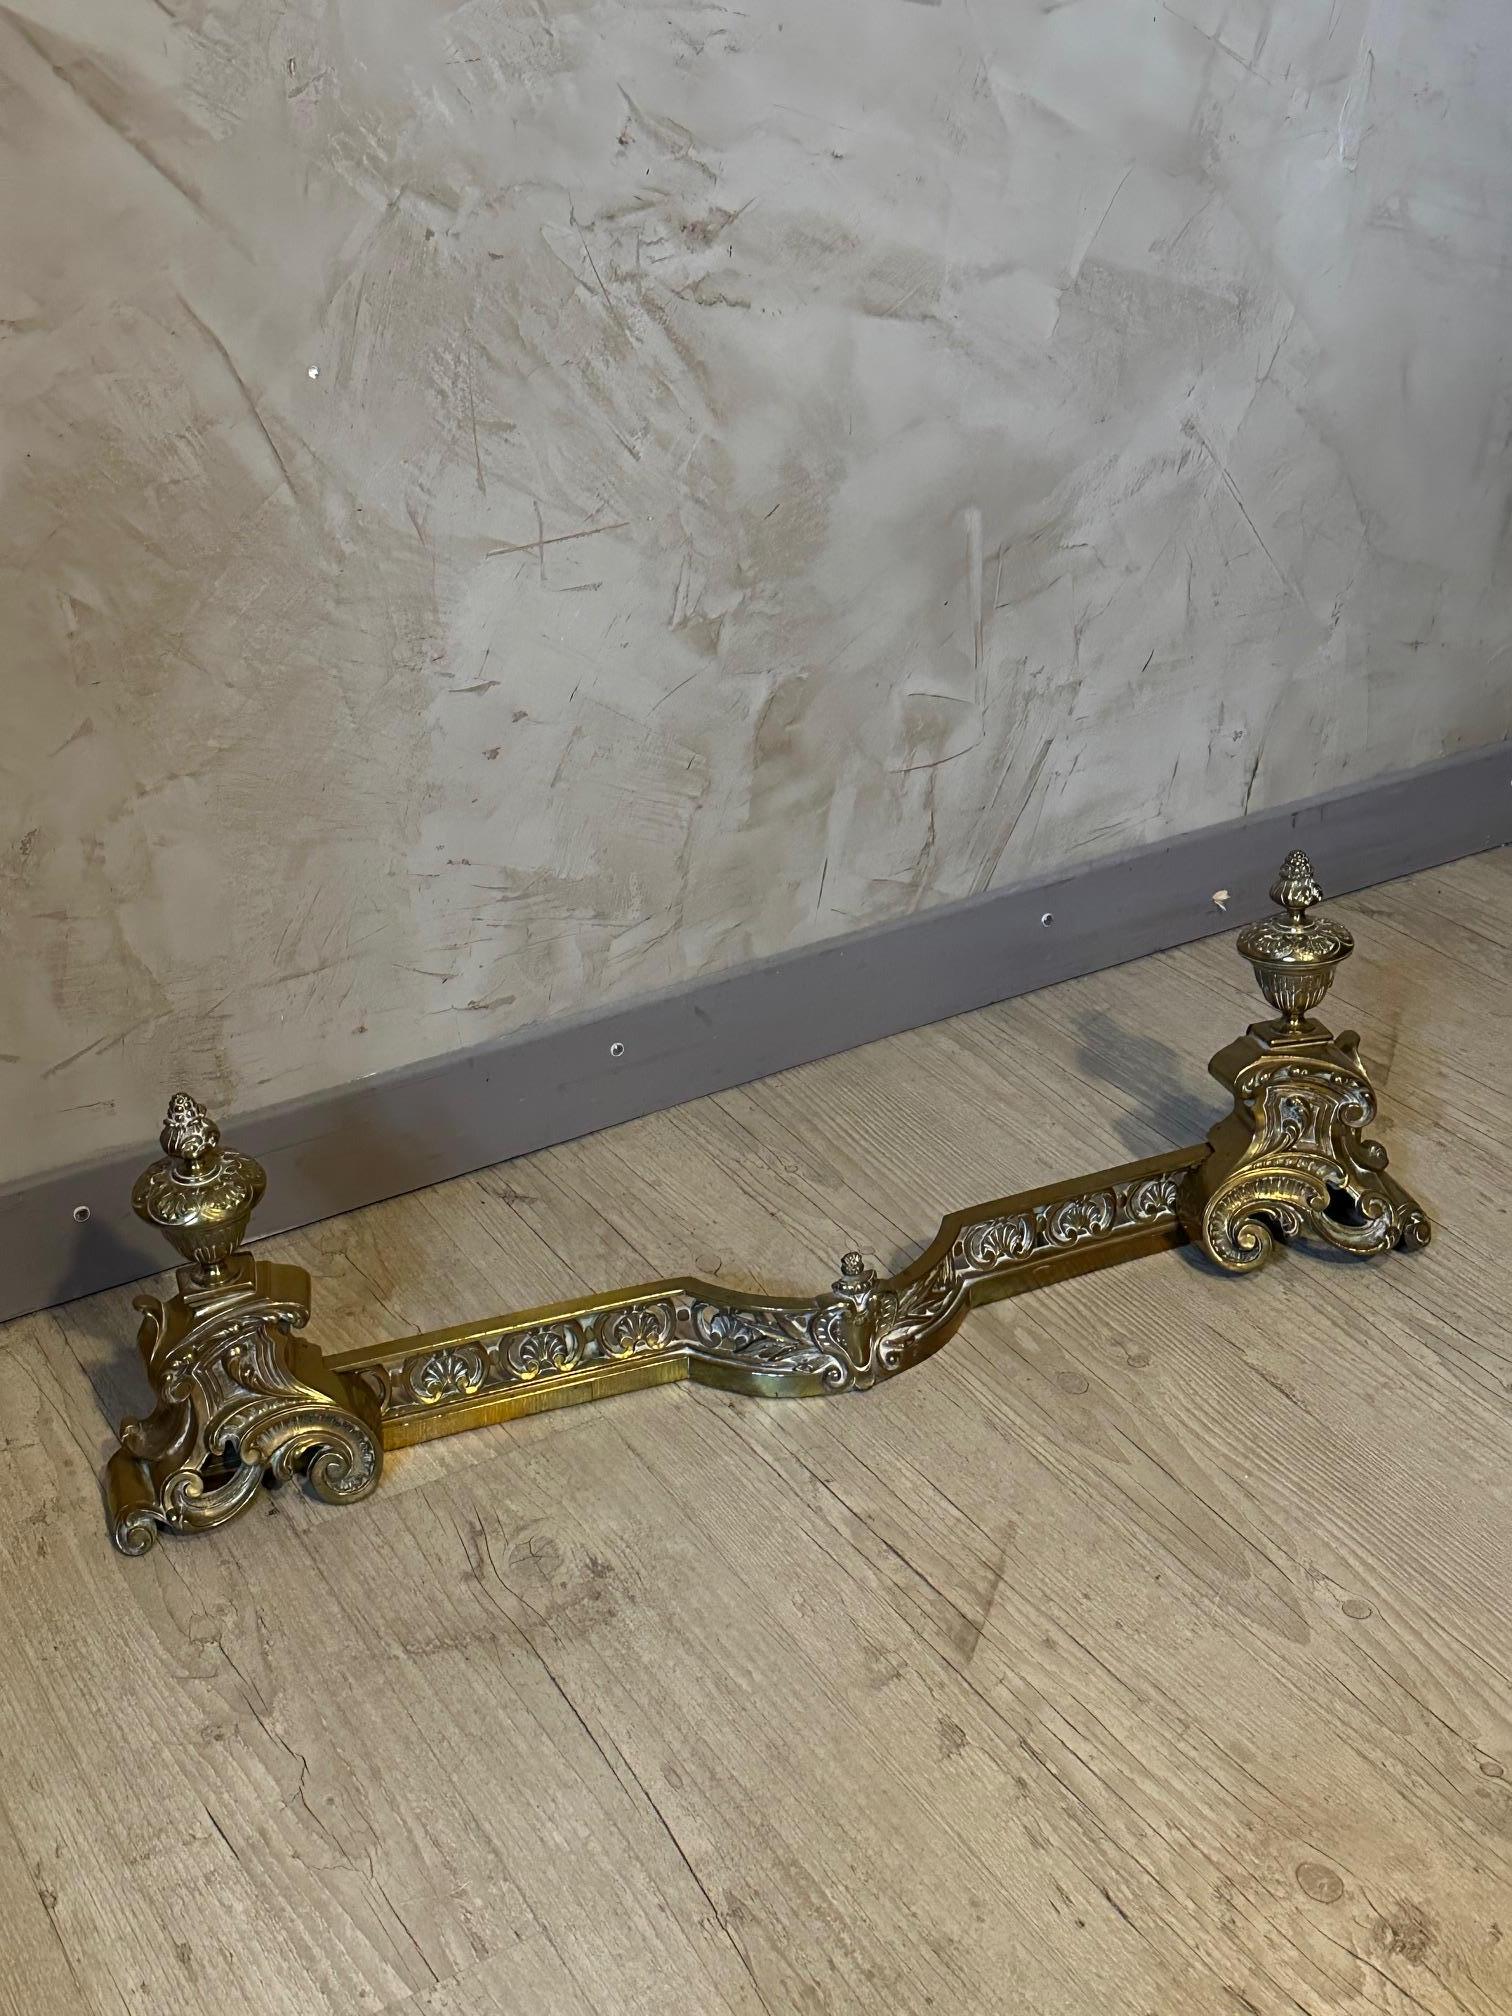 Nice pair of Louis XV style gilt bronze andirons with adjustable fender
The two andirons are detachable from the fender. The andirons are representing medicis. 
The andirons are used: To support the logs without them directly touching the floor of